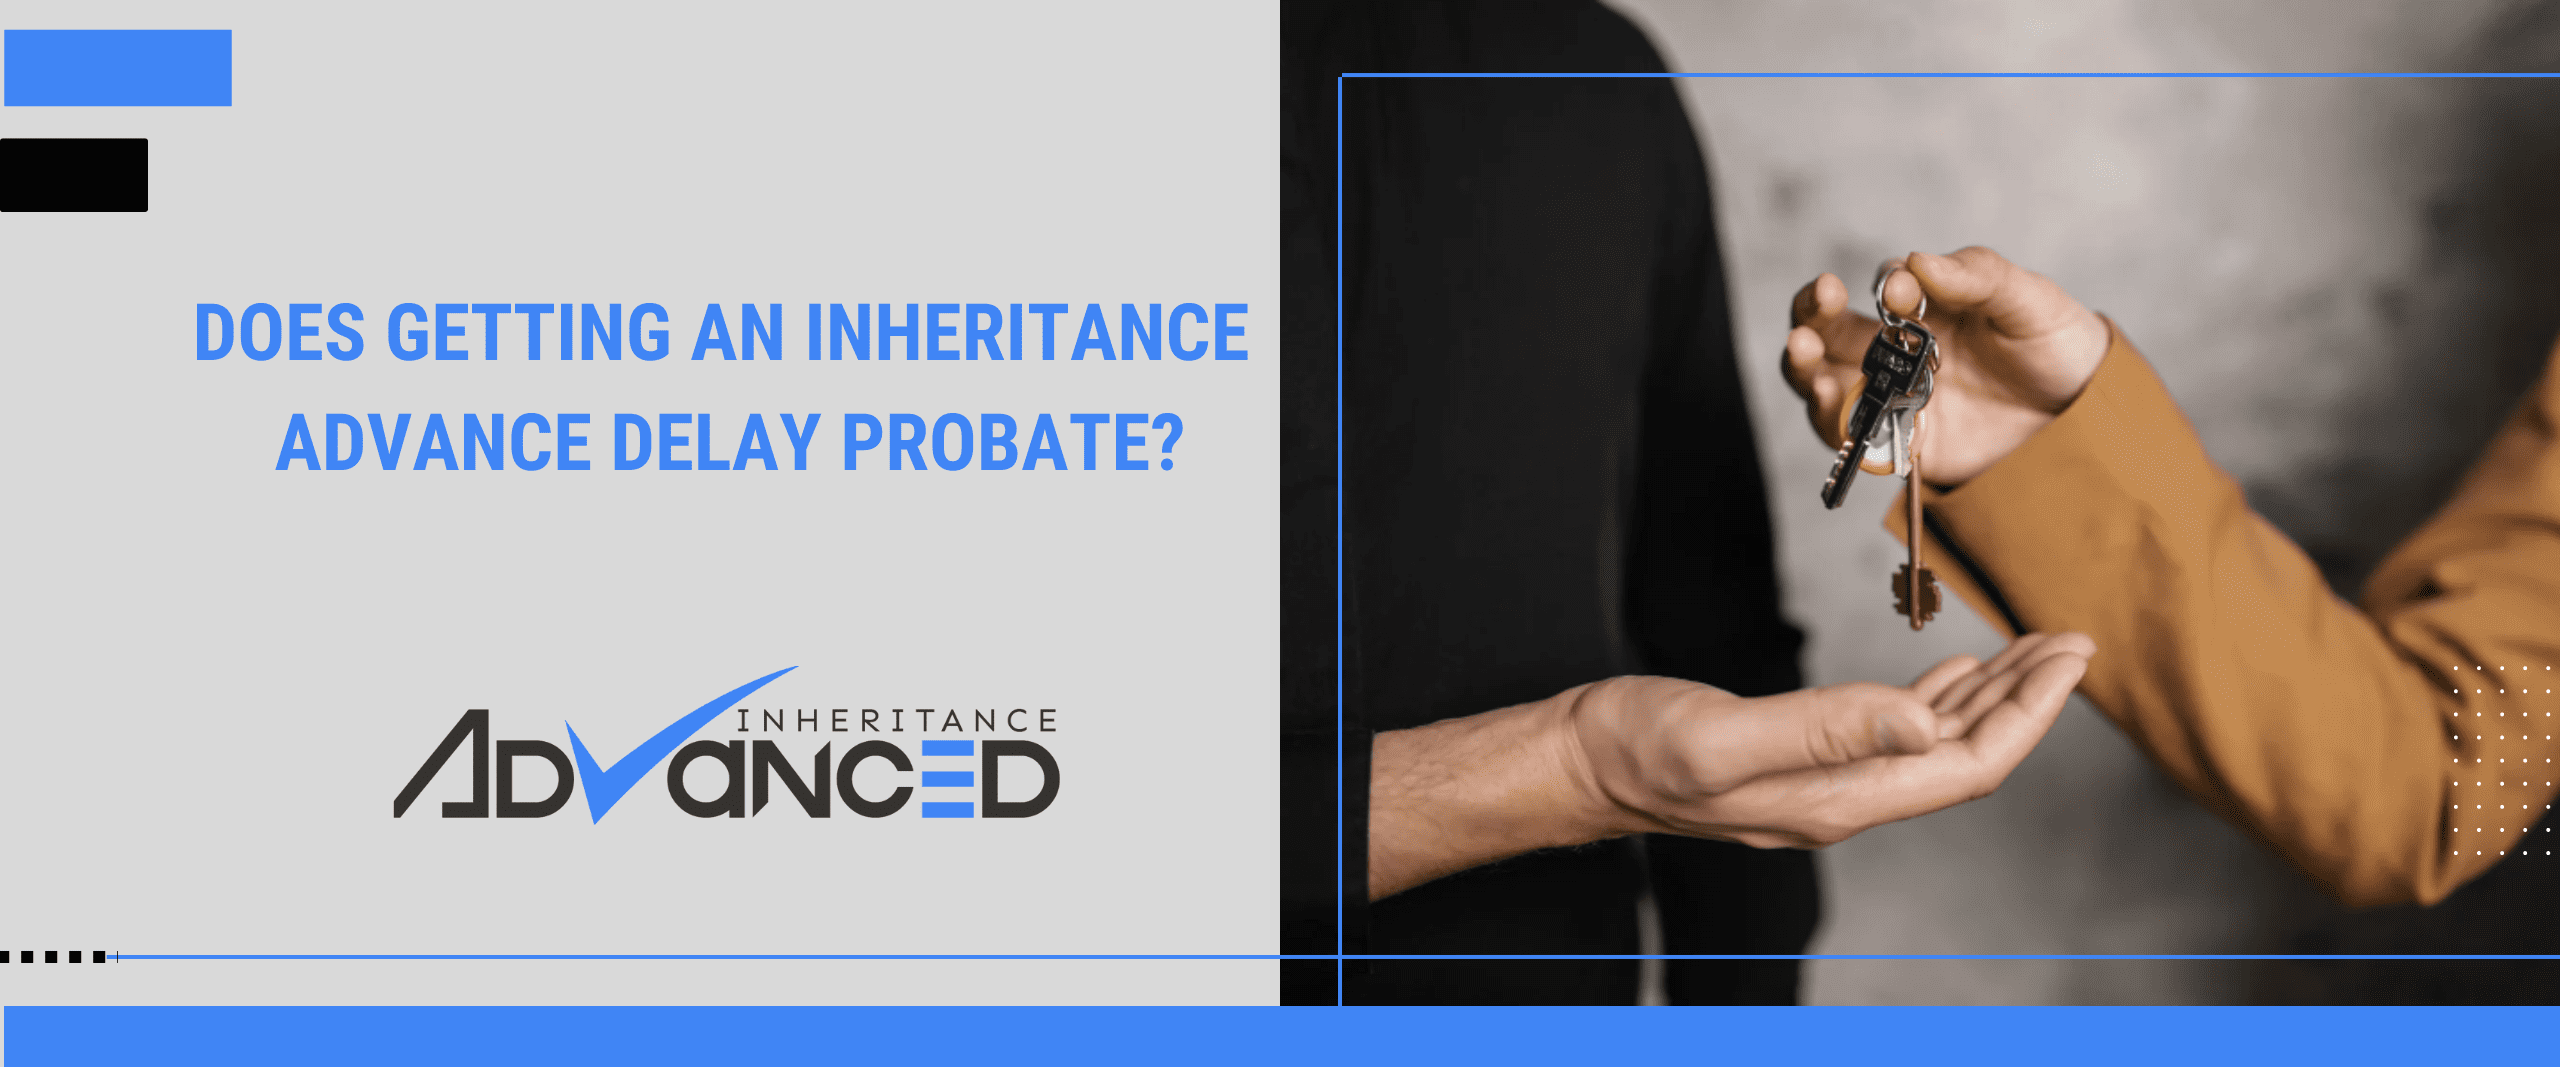 Does Getting An Inheritance Advance Delay Probate